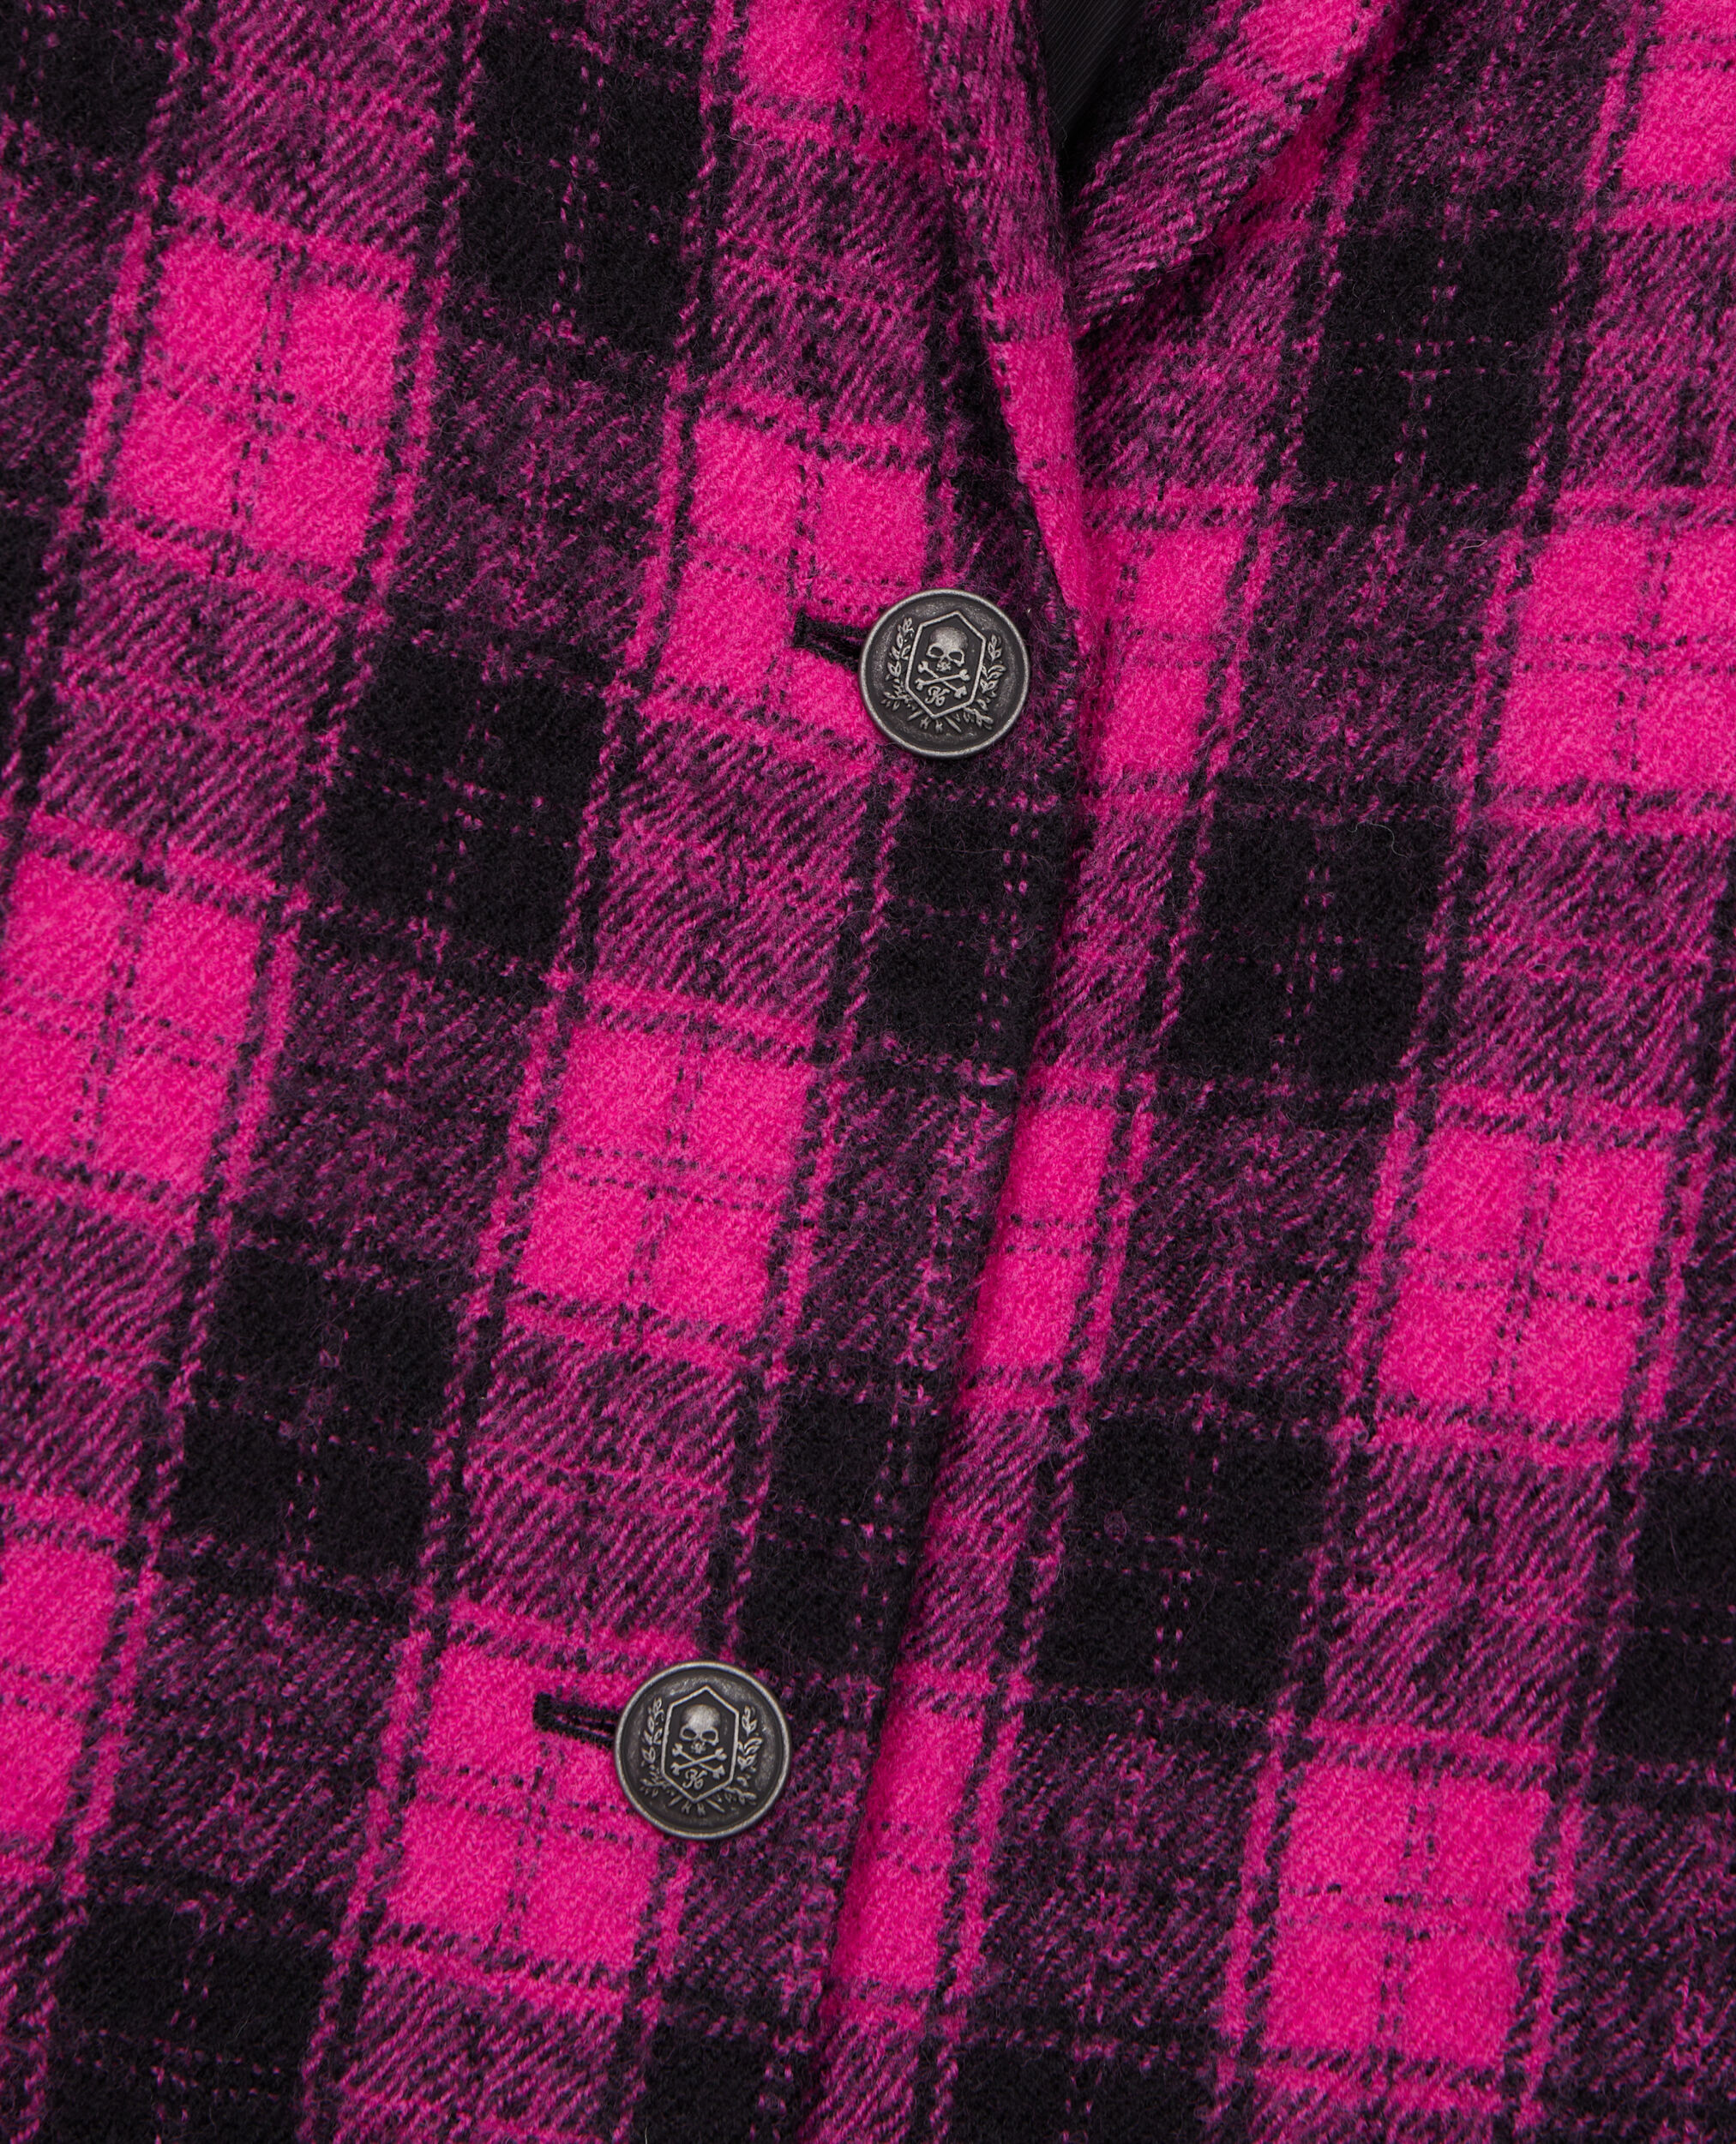 Long coat with black and pink checks, PINK BLACK, hi-res image number null